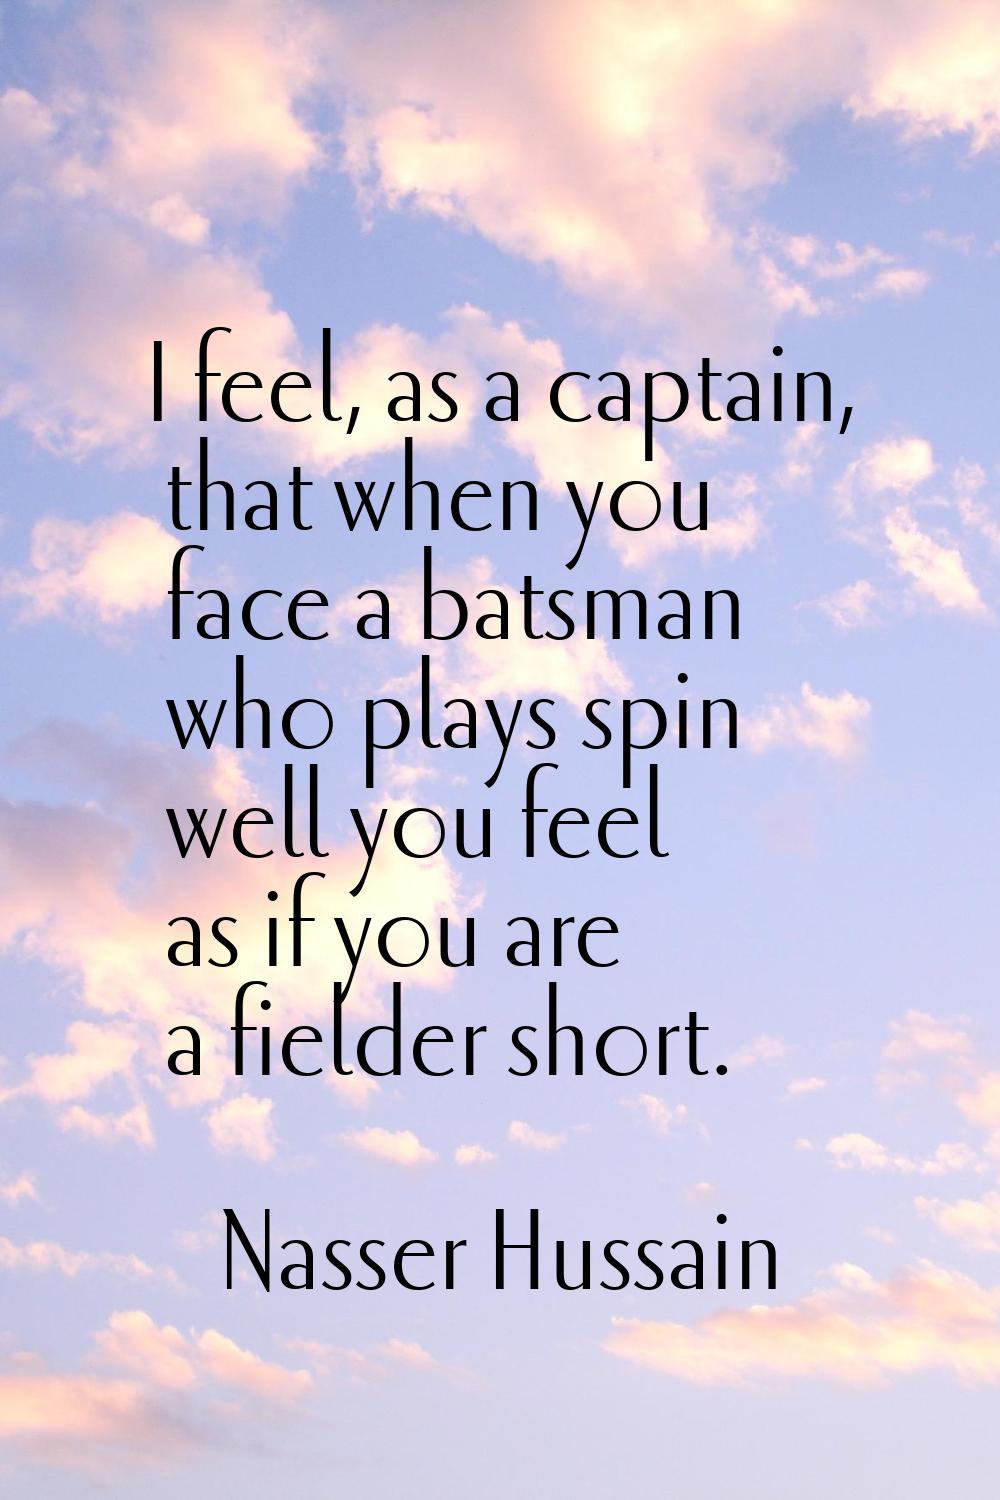 I feel, as a captain, that when you face a batsman who plays spin well you feel as if you are a fie